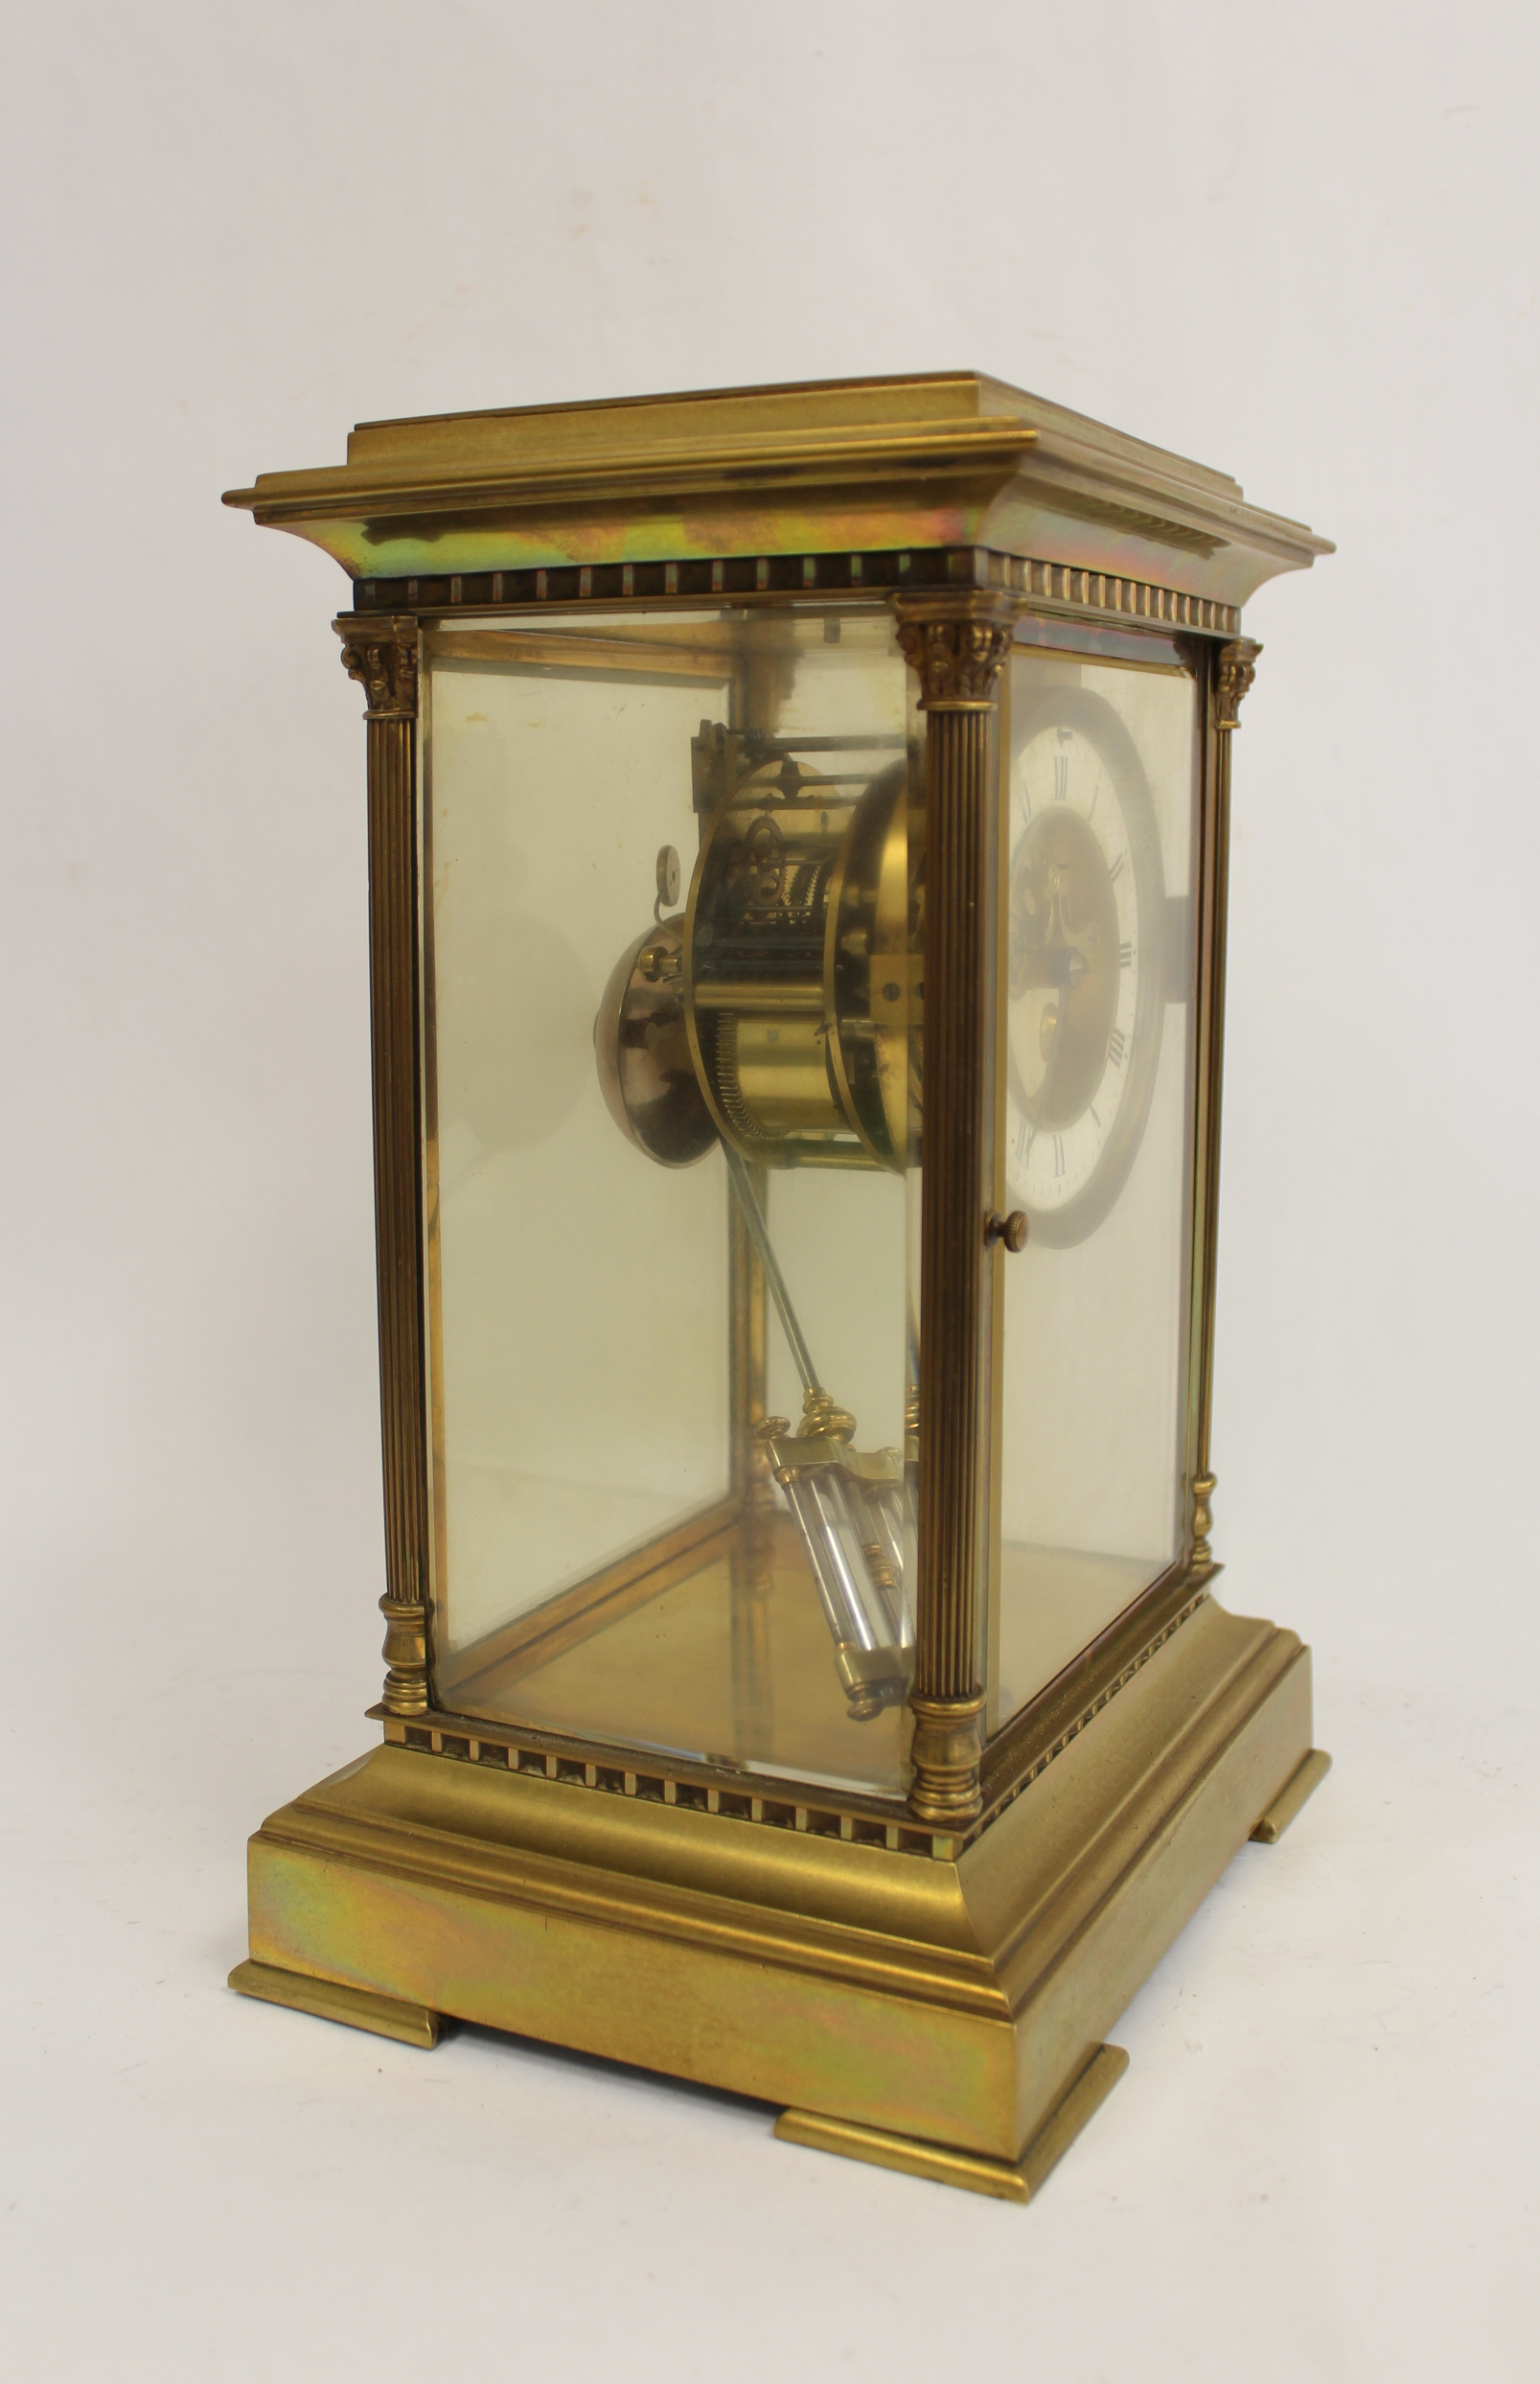 French mantel clock of 'four glass' style with visible escapement, 'mercury' pendulum and fluted - Image 3 of 5